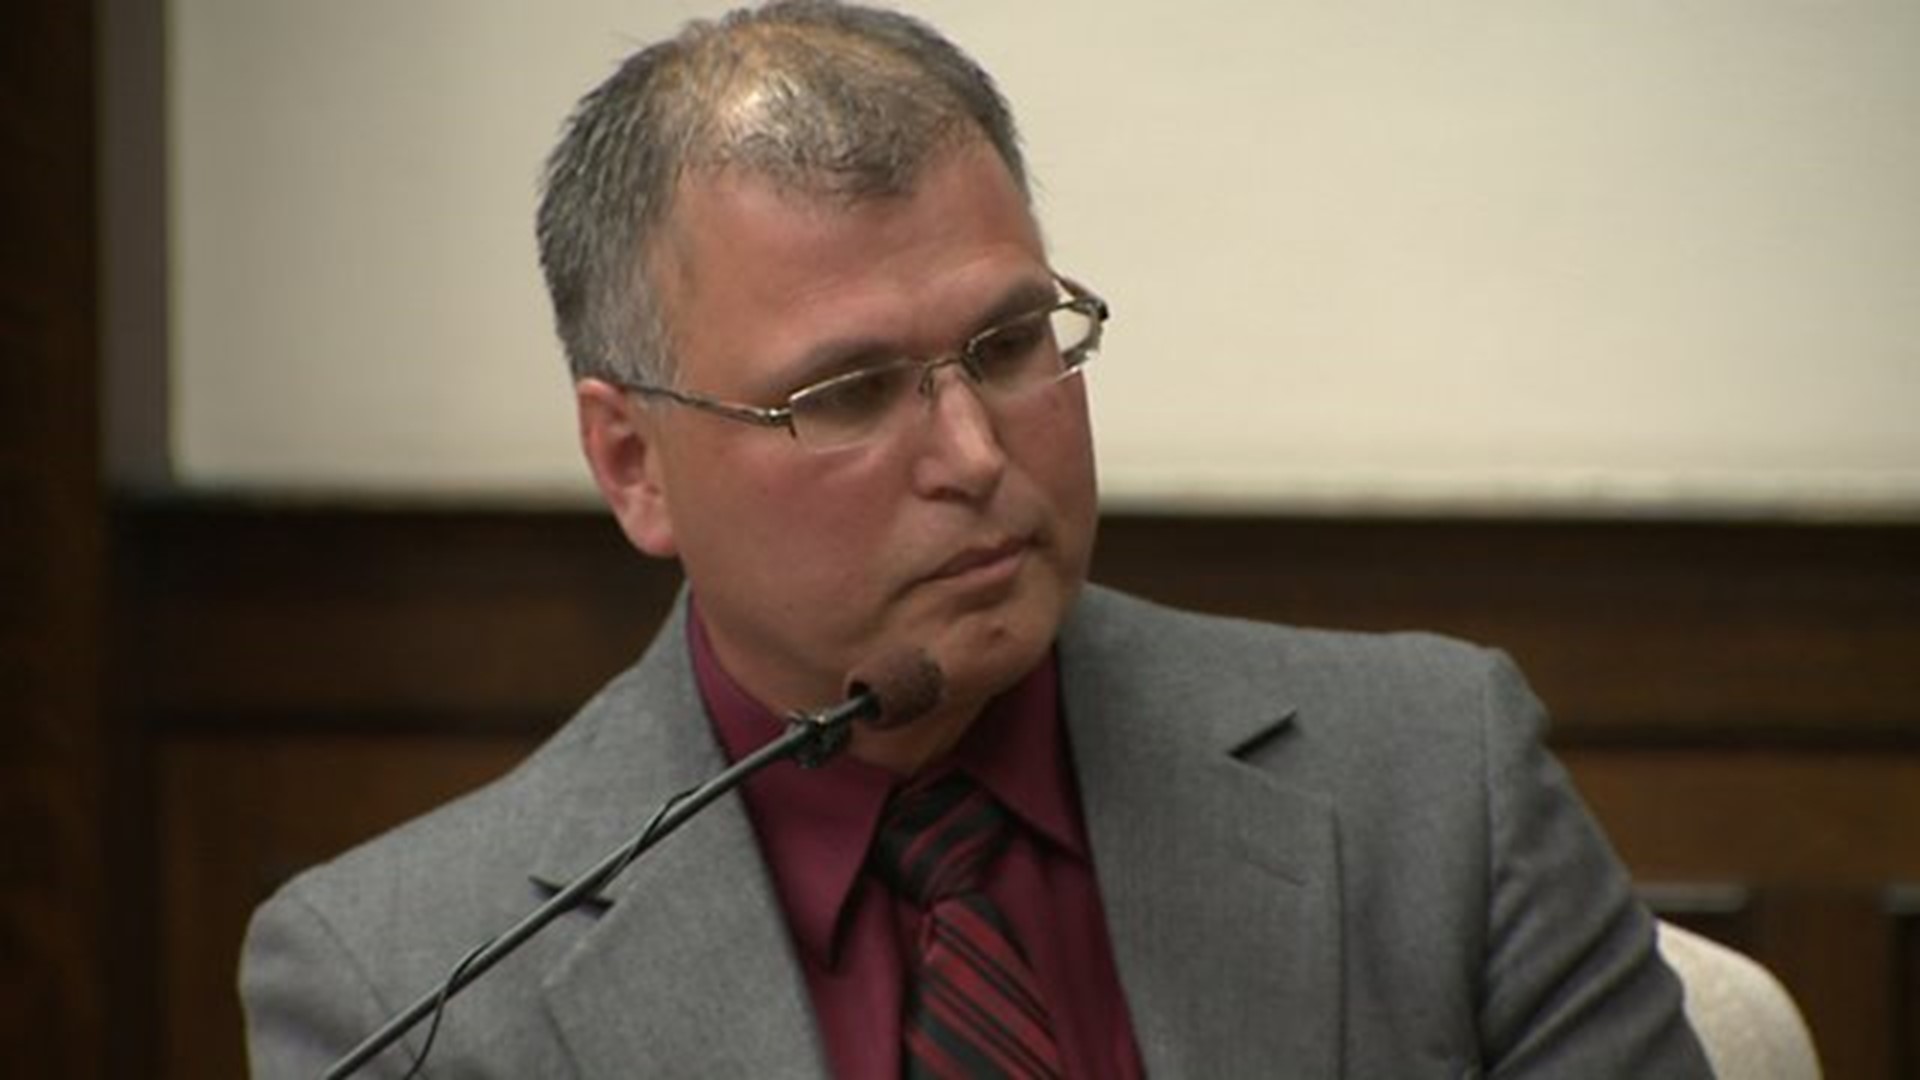 Former cop accused of rape takes the stand, says sex was consensual